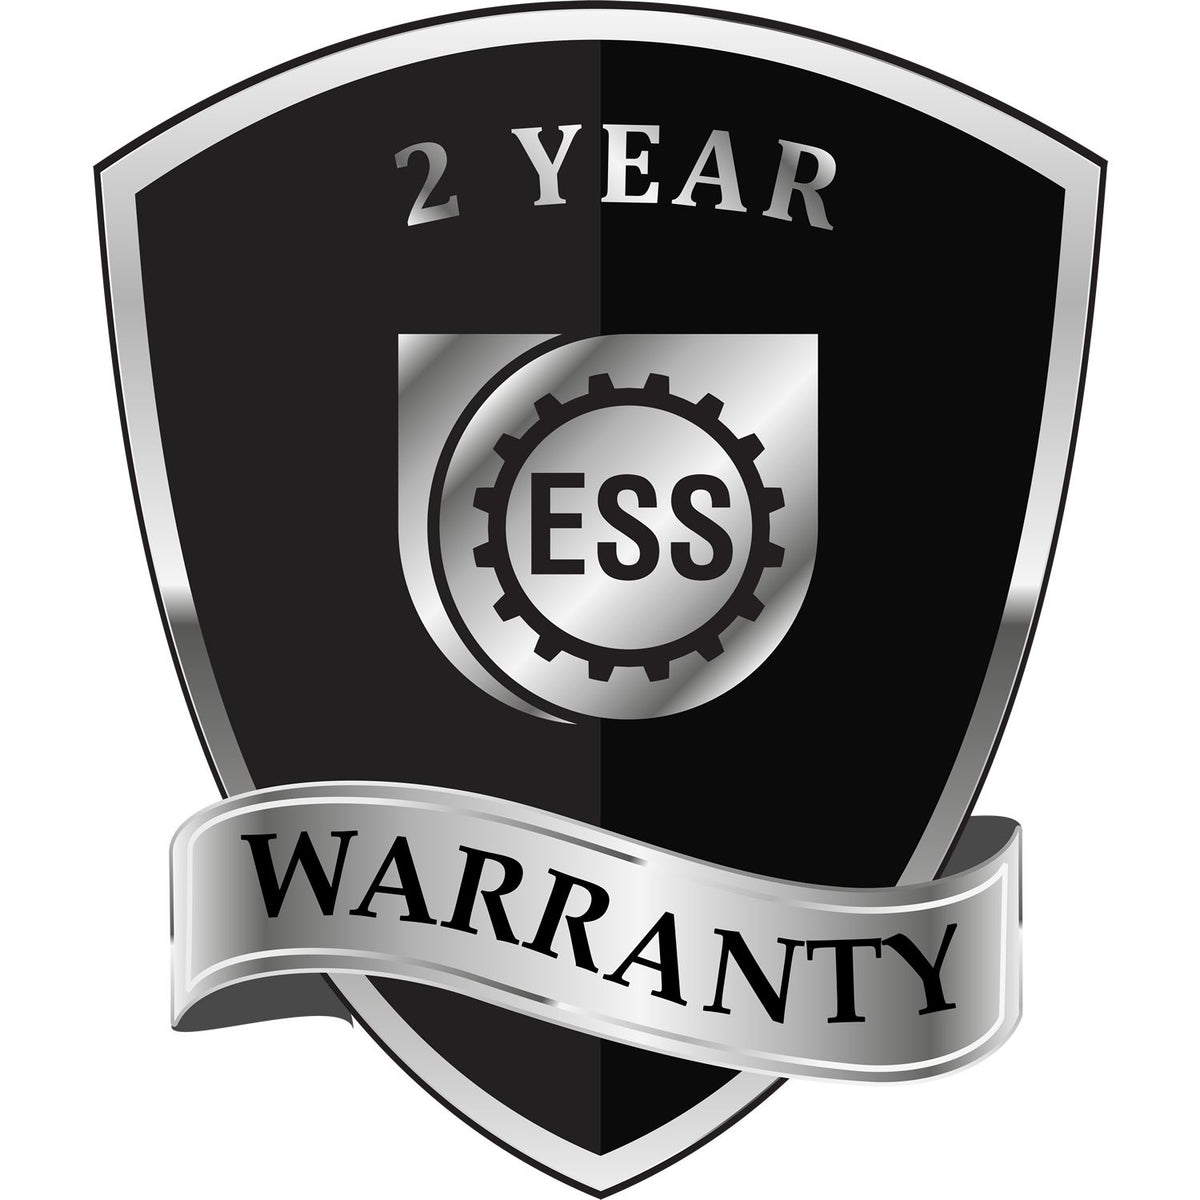 A badge or emblem showing a warranty icon for the District of Columbia Desk Surveyor Seal Embosser